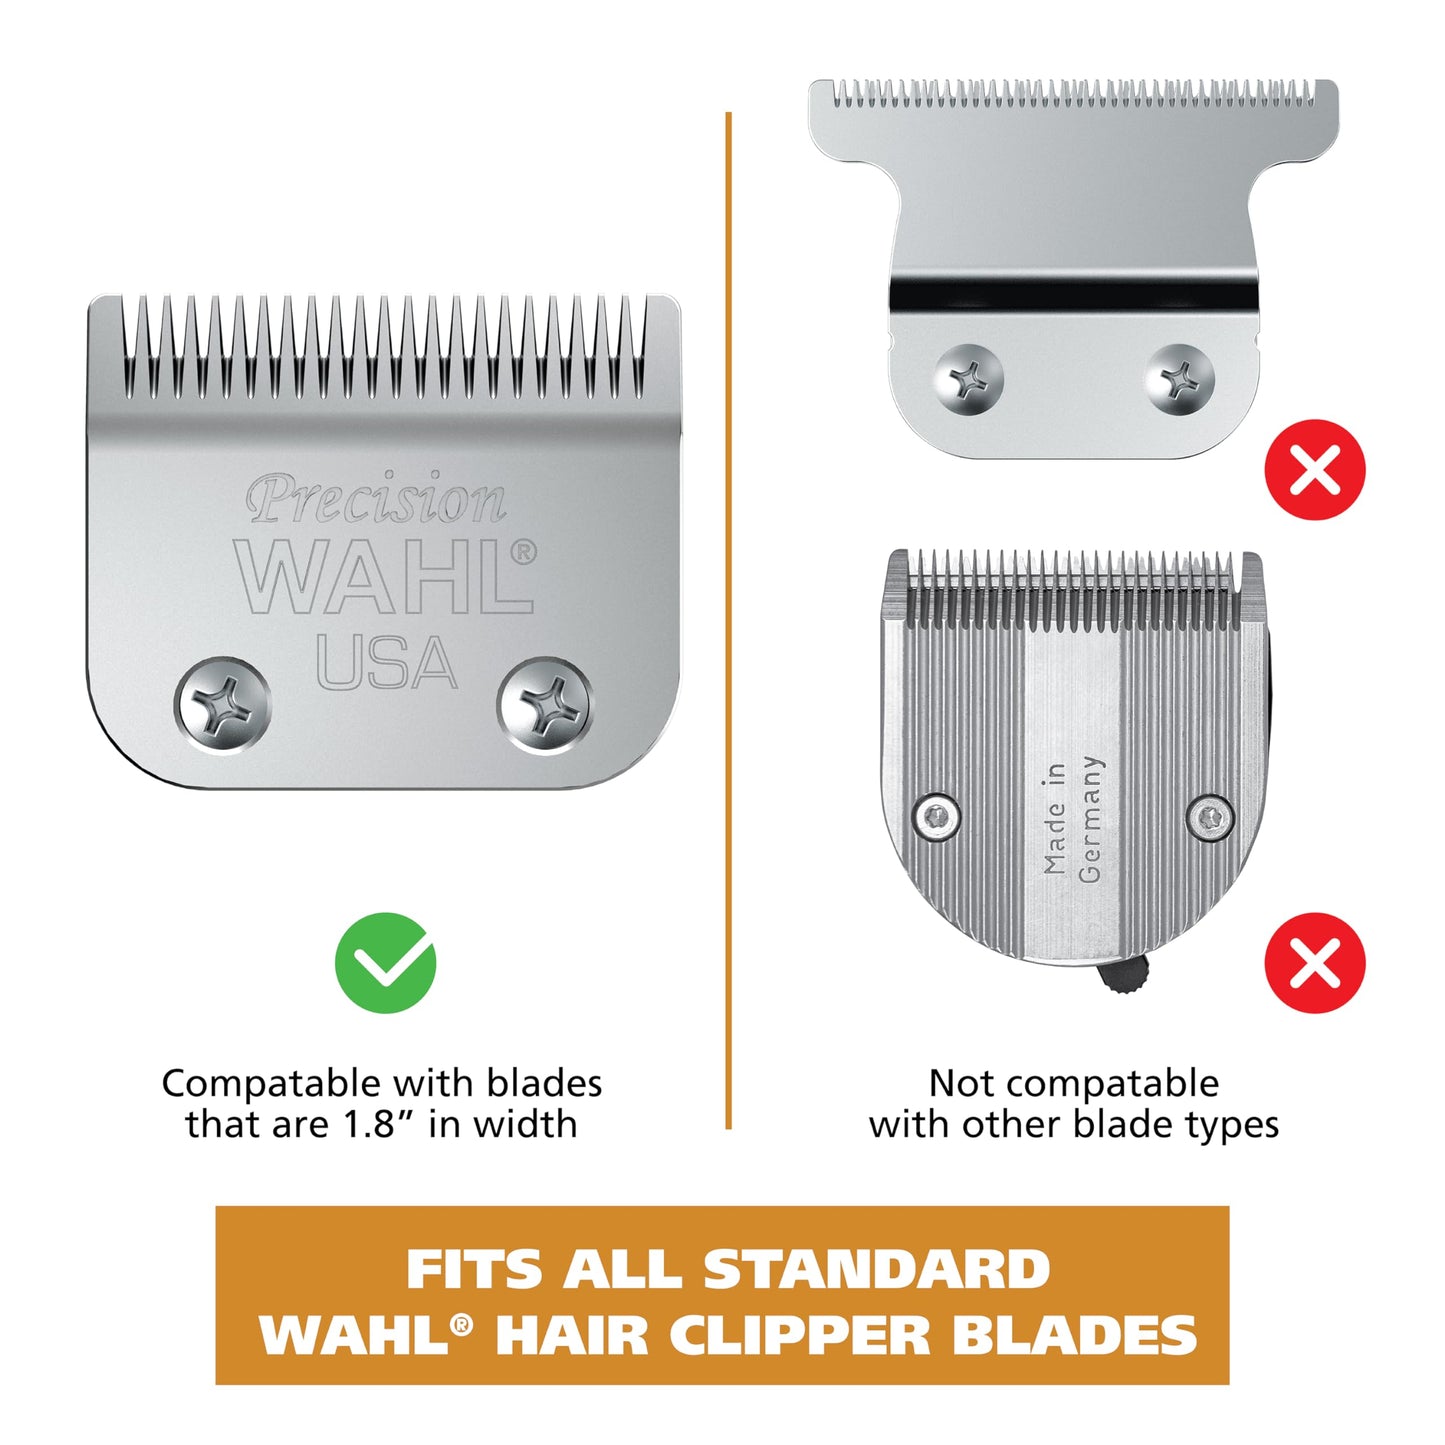 Wahl Hair Clipper Genuine Secure Fit Attachment Guard Set for Long Hair Styles and Fades, 2 Full Size Hair Clipper Guide Combs for Increased Cutting Performance - Model 3025025